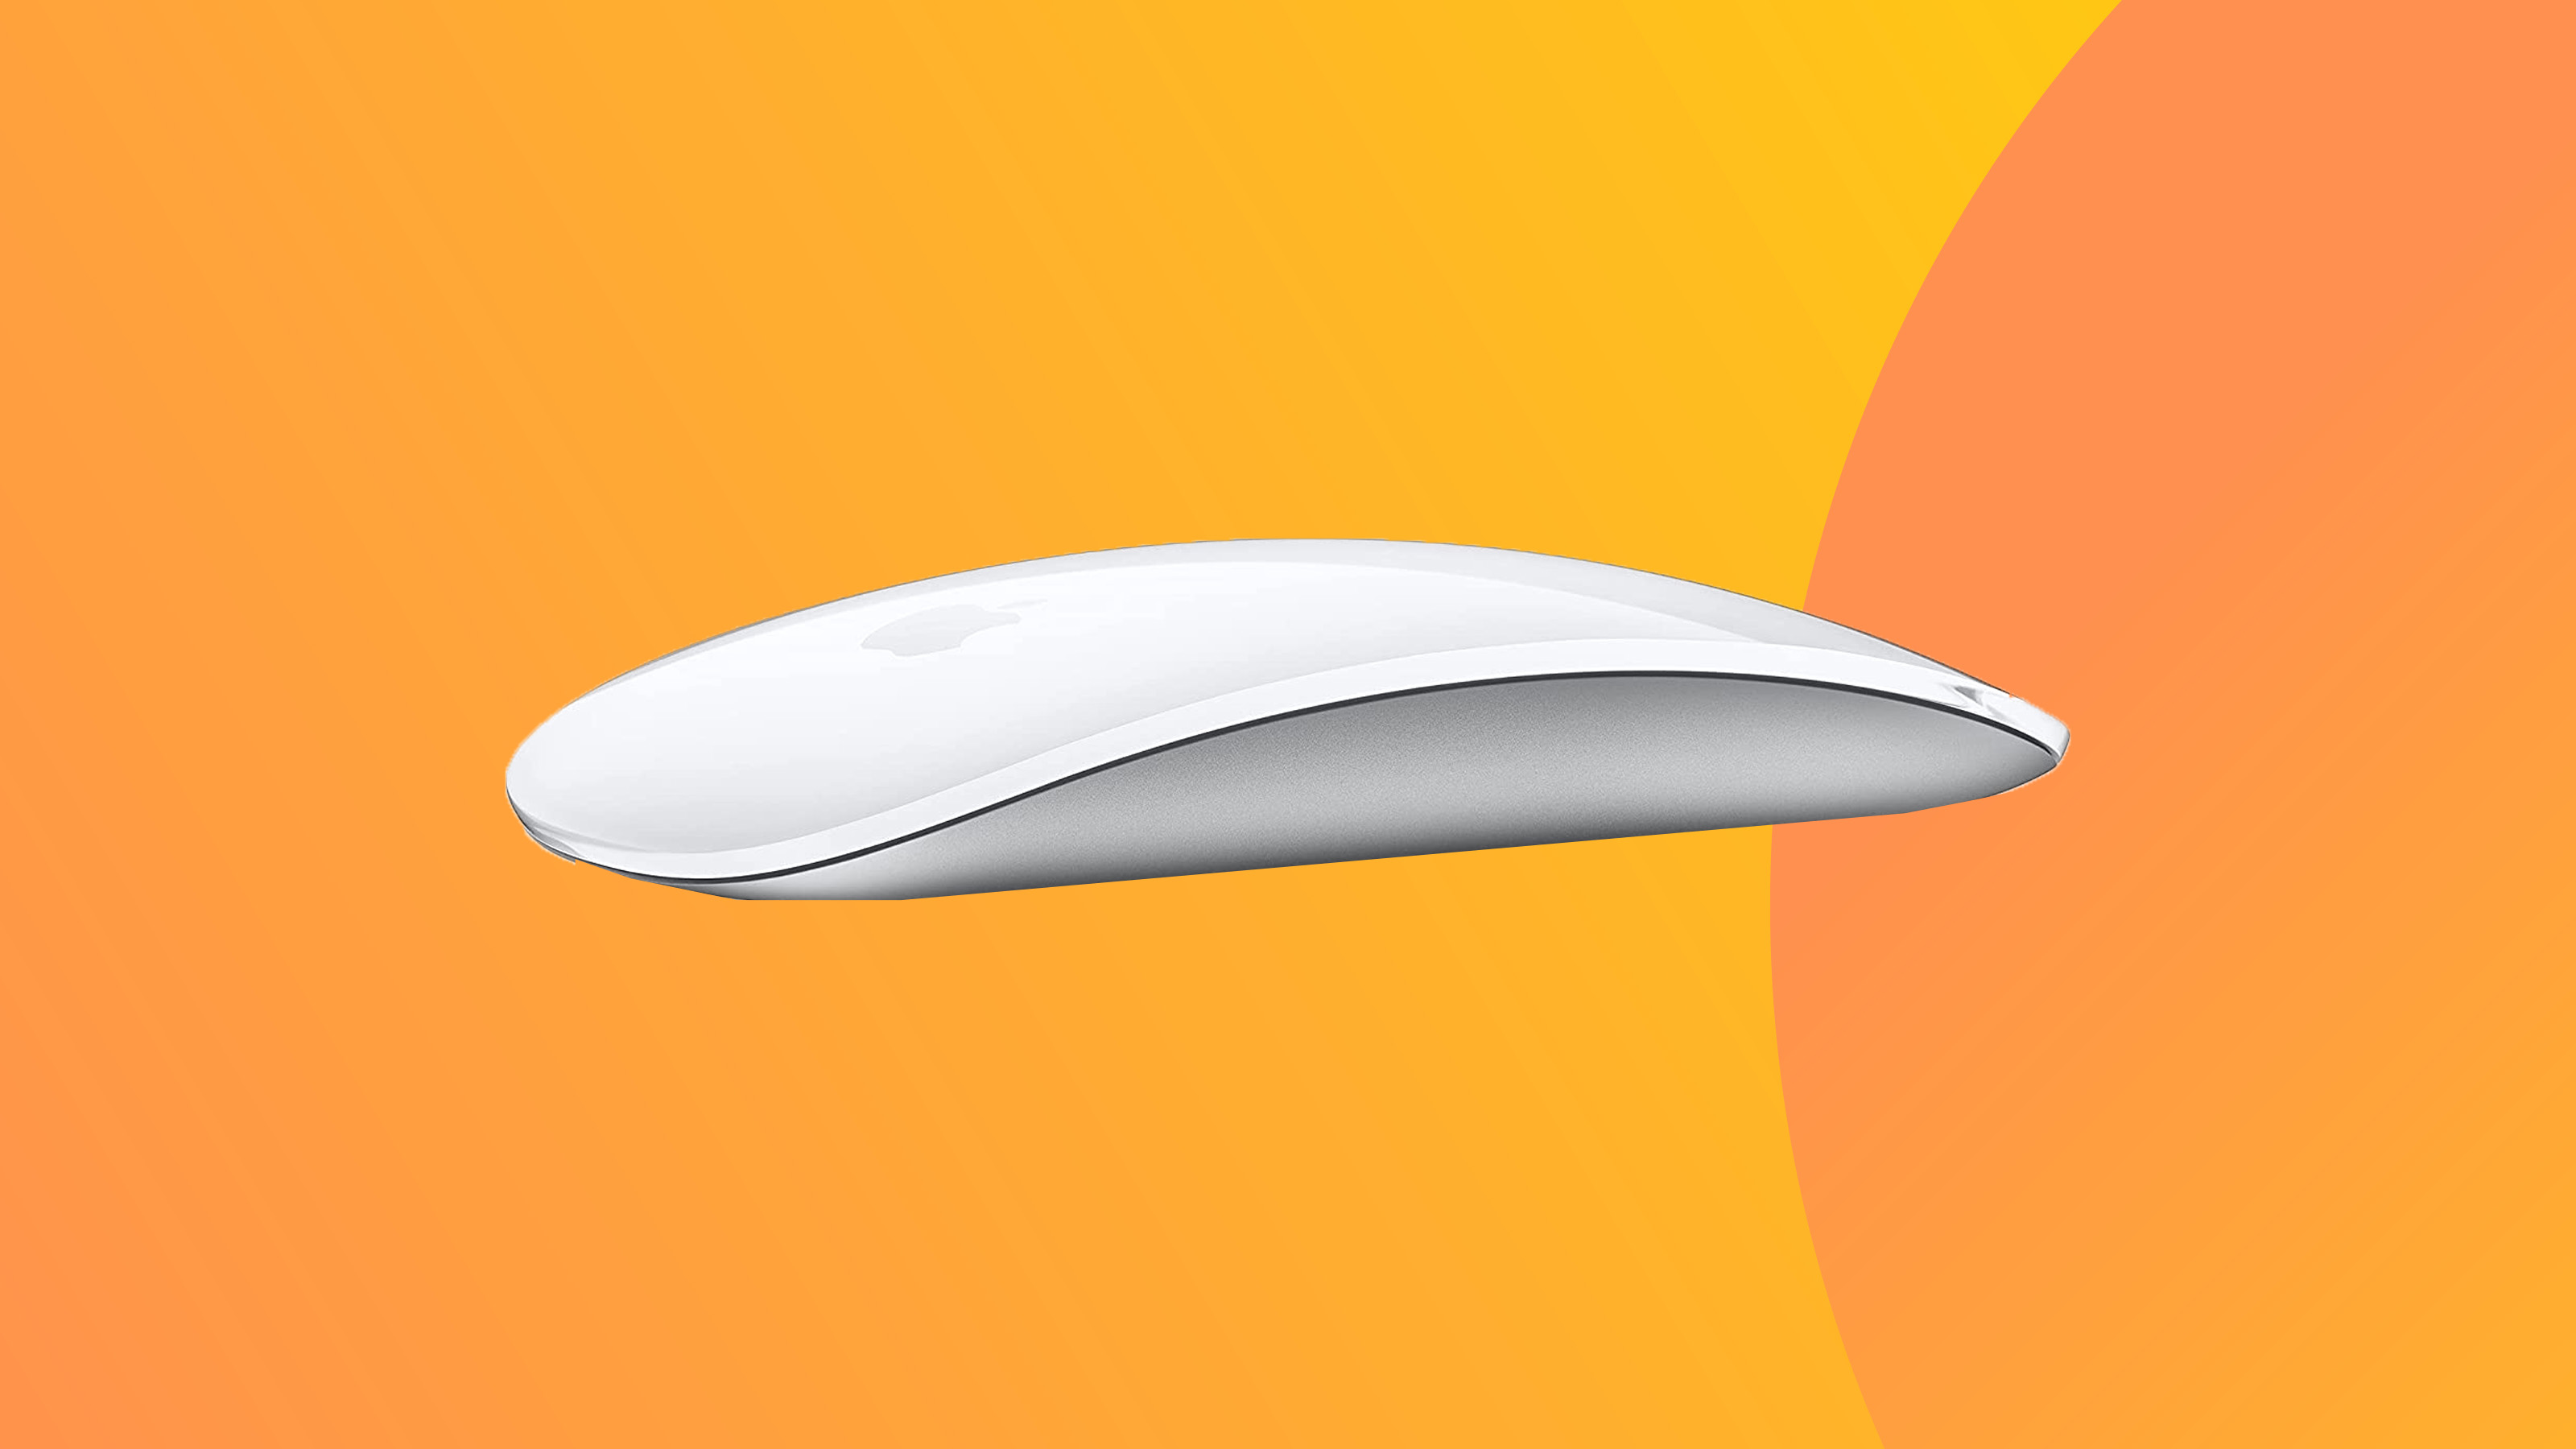 A product shot of the apple magic mouse on a colourful background